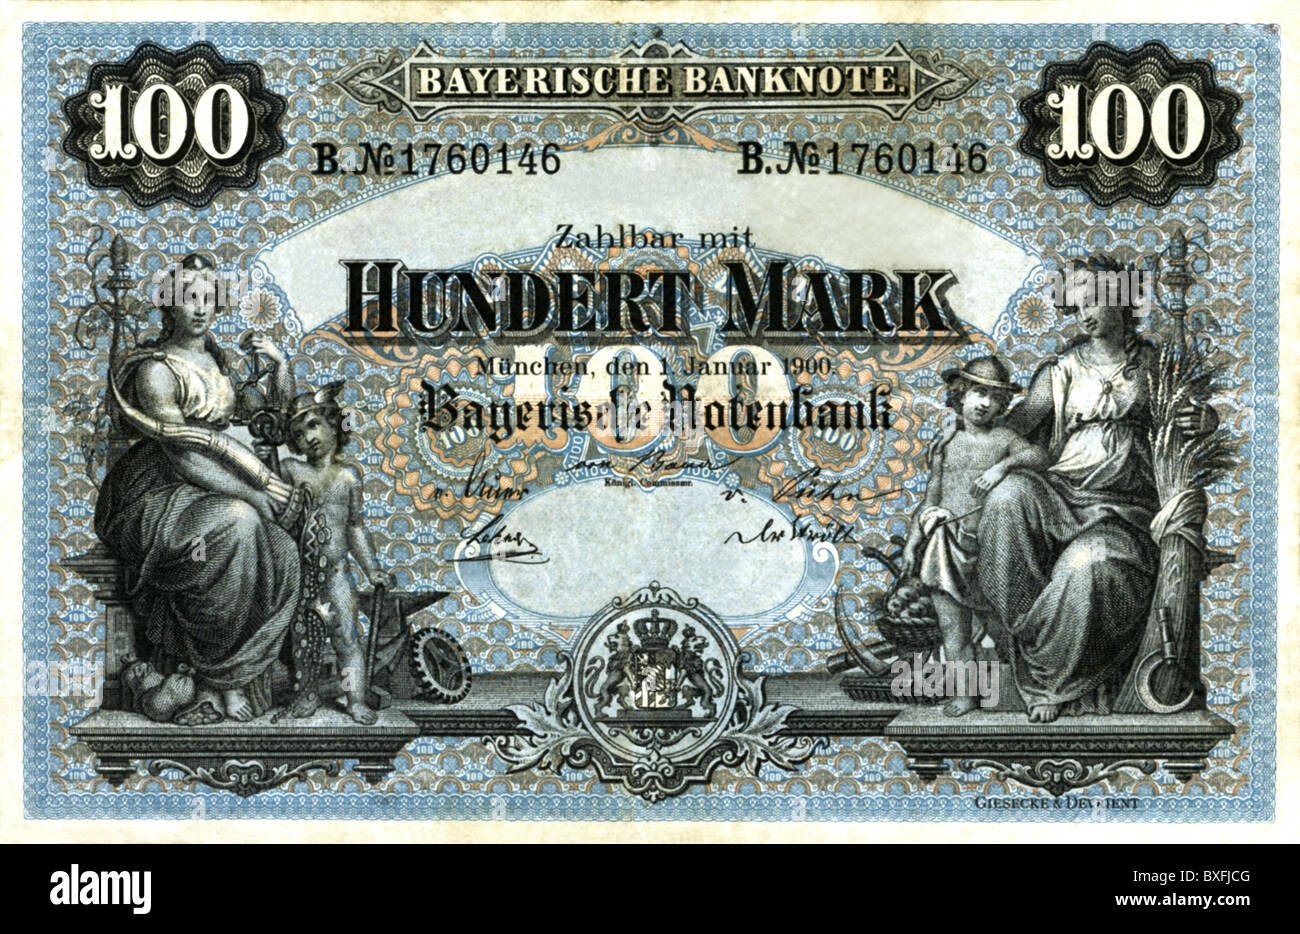 money / finance, bank notes, Germany, Bavaria, 100 Mark, made by Giesecke & Devrient, Munich, 1900, Additional-Rights-Clearences-Not Available Stock Photo